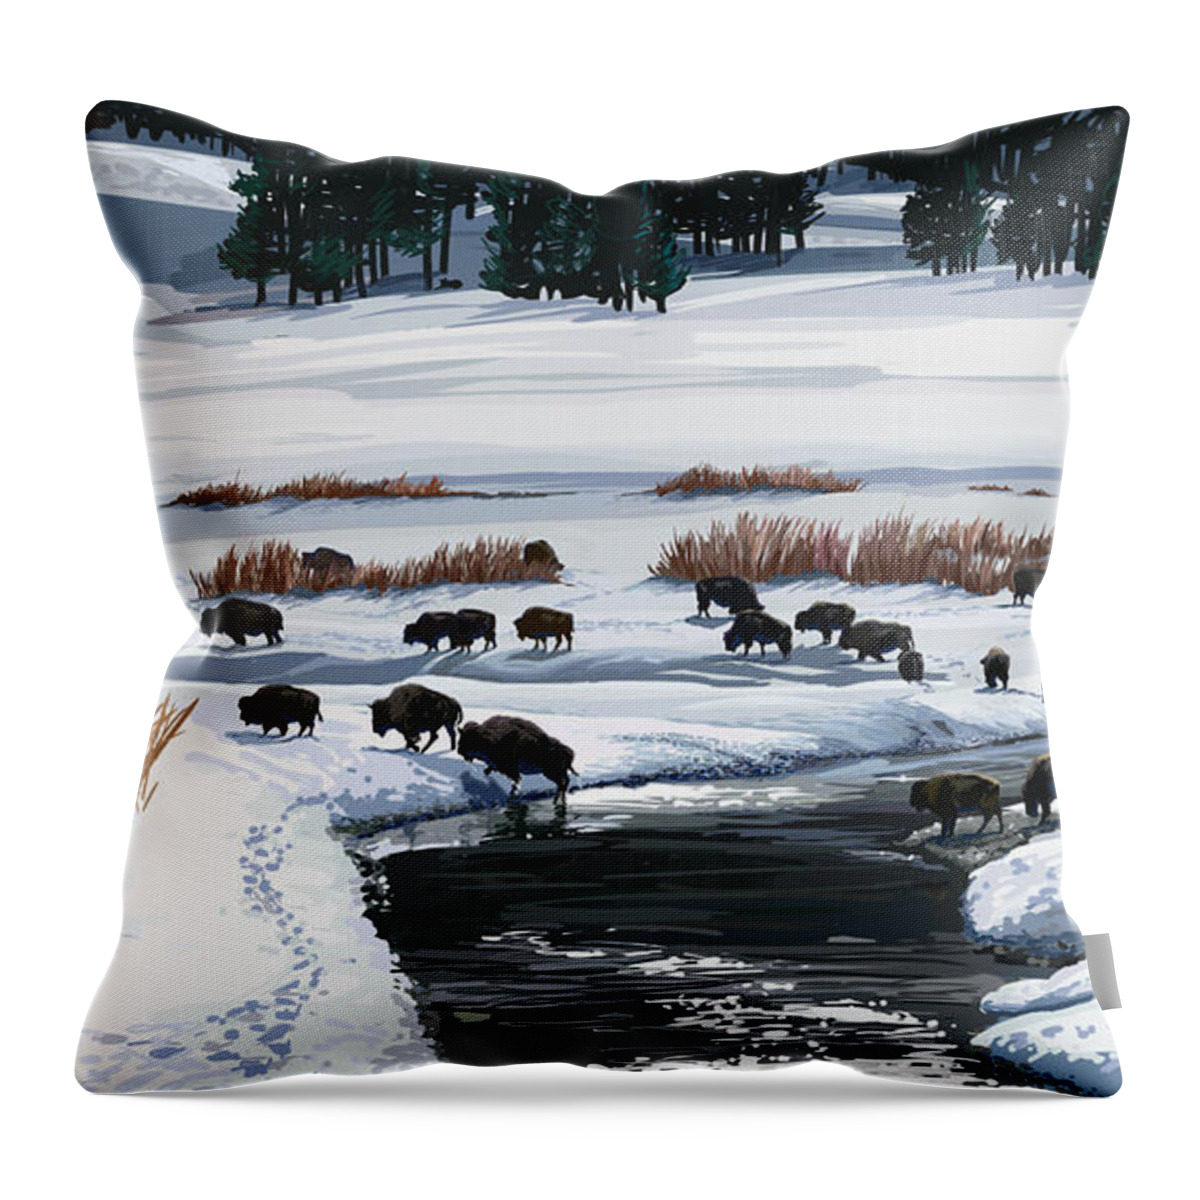 Buffalo Throw Pillow featuring the painting Buffalo Ford Winter by Pam Little